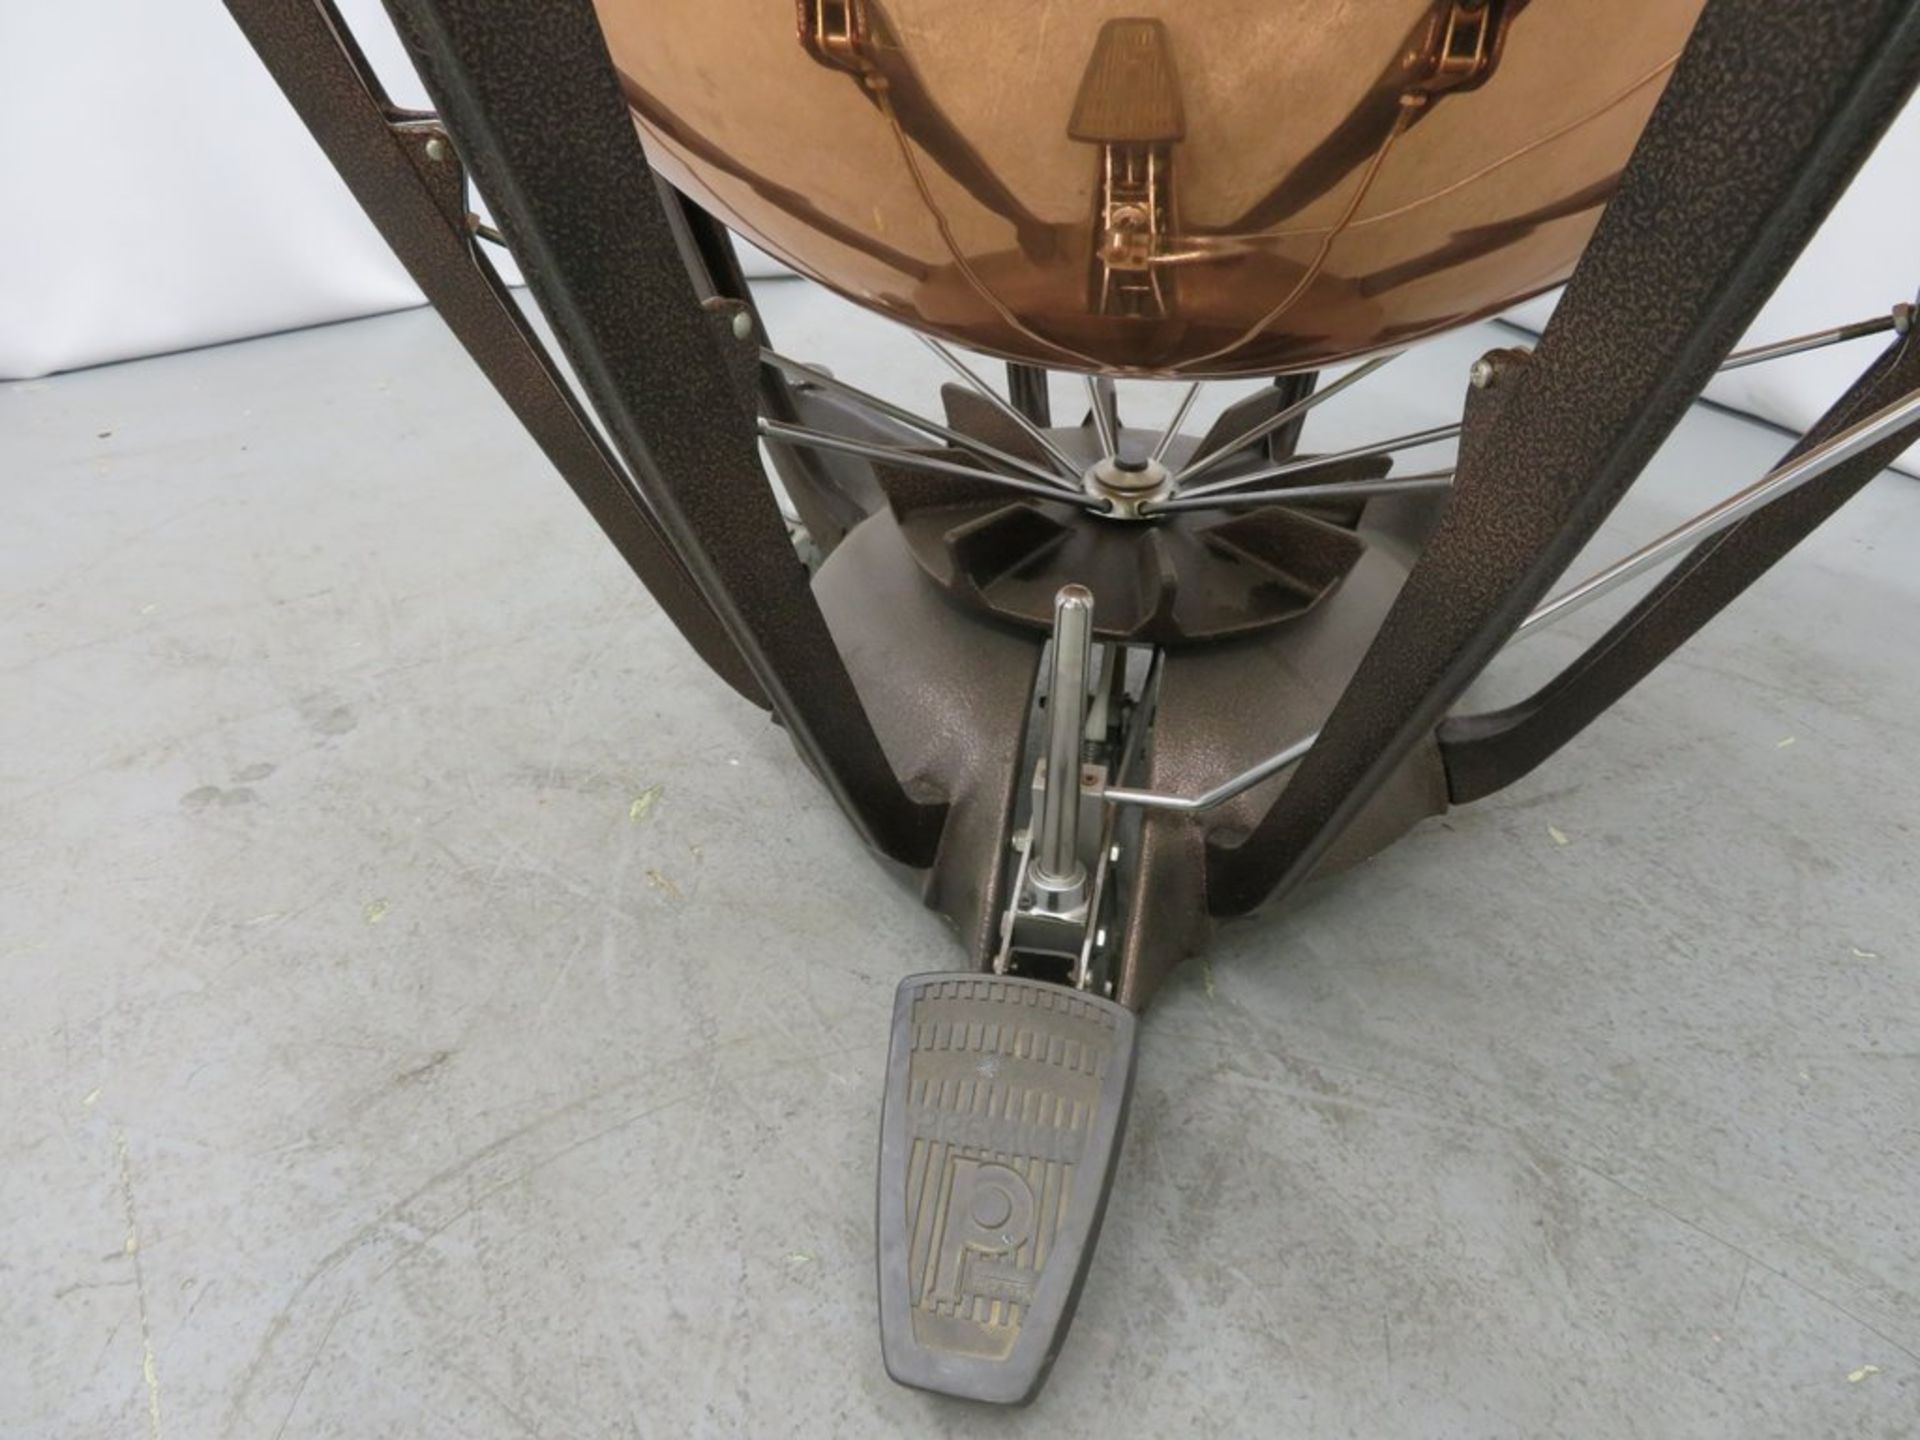 Premier 32"" Kettle Drum Complete With Padded Cover. - Image 5 of 6